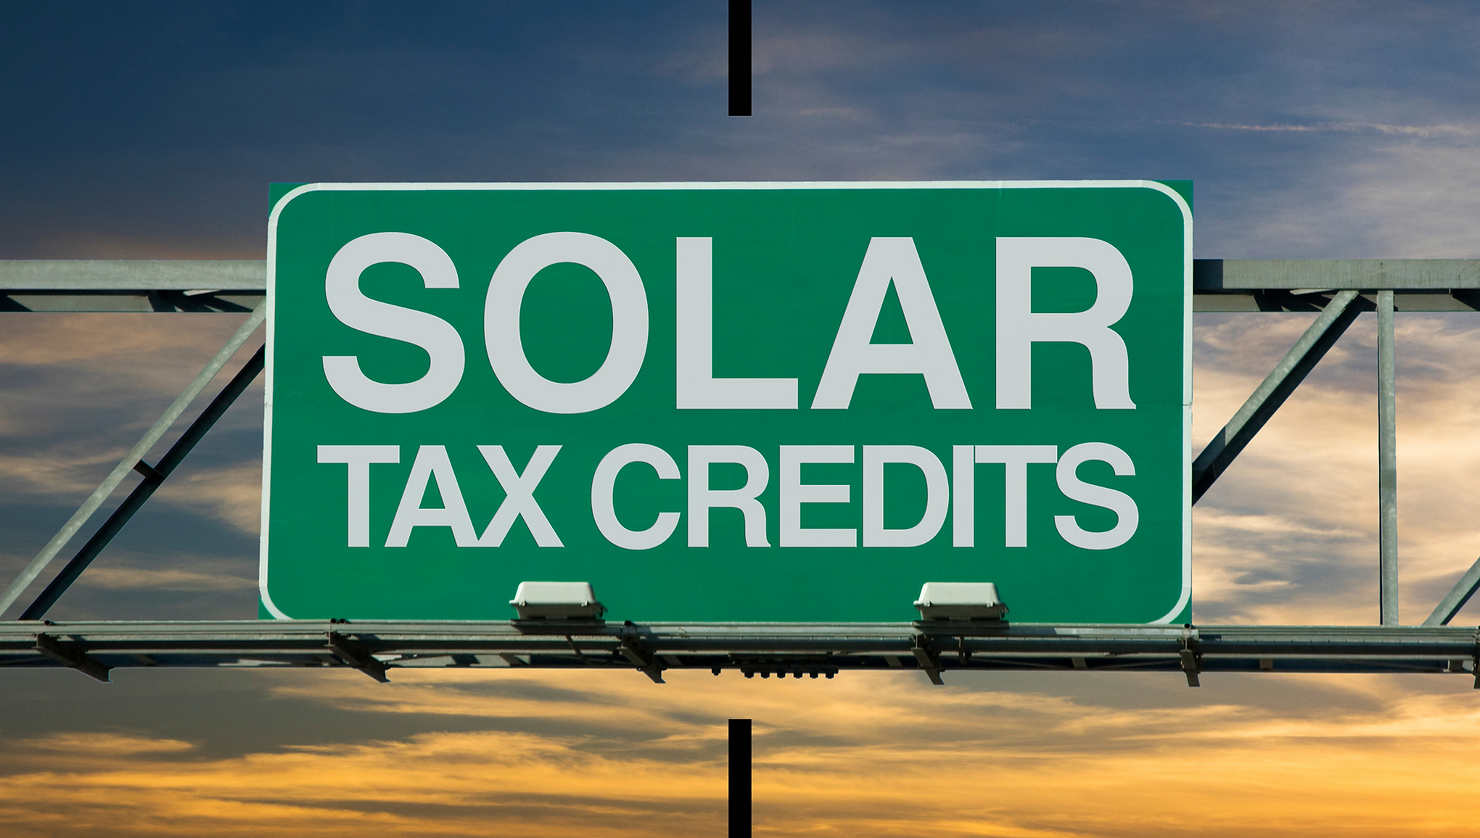 Updates To The 2022 US Solar Tax Credits and How It Can Benefit You